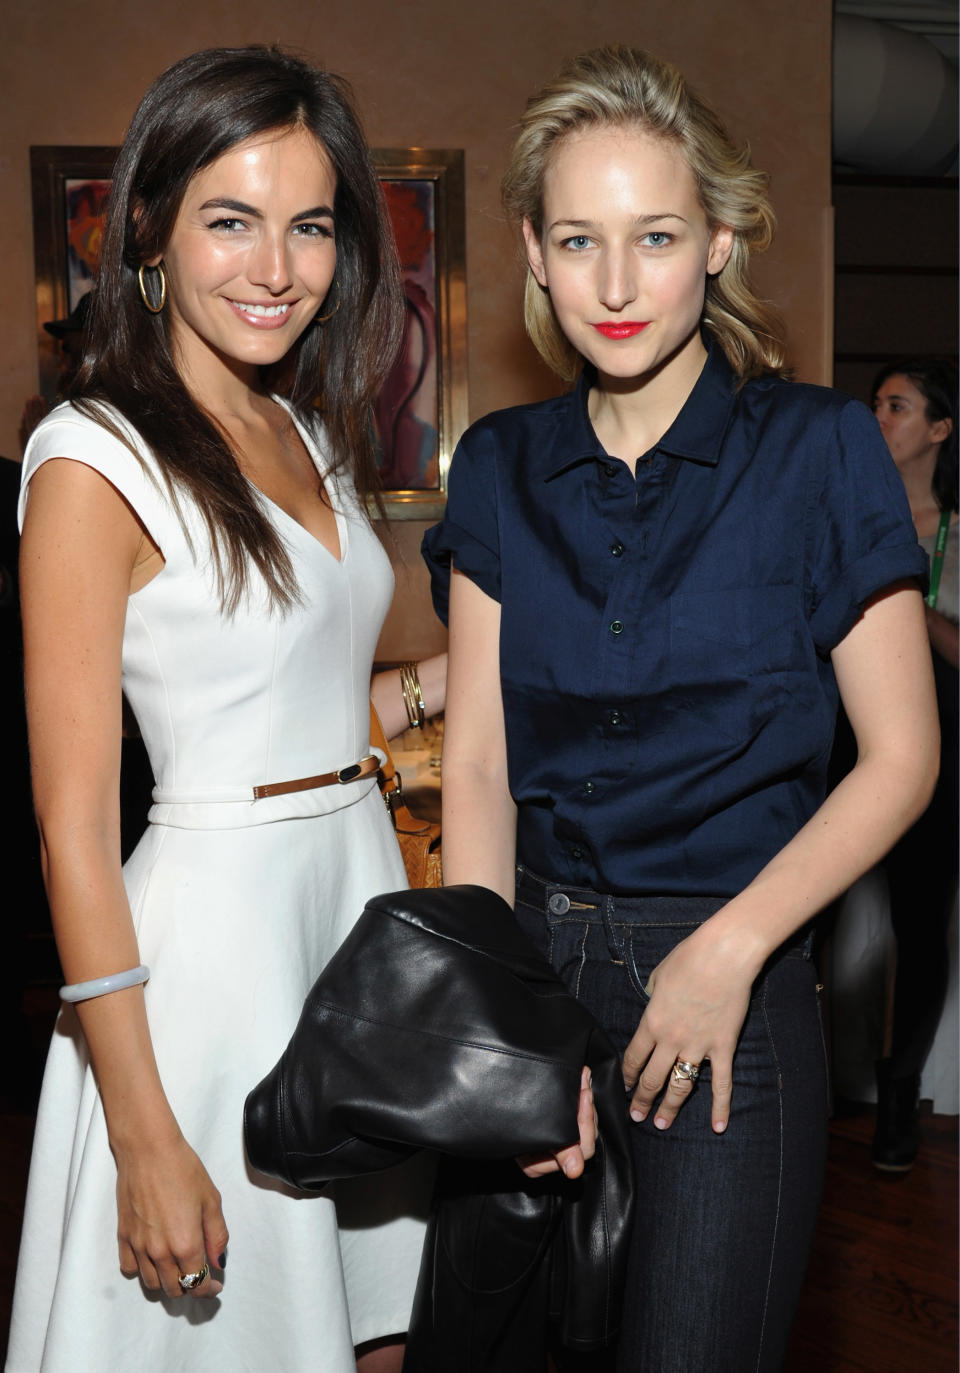 NEW YORK, NY - APRIL 19: Actresses Camilla Belle and Leelee Sobieski attend the 2012 Tribeca Film Festival Jury lunch at the Tribeca Grill Loft on April 19, 2012 in New York City. (Photo by Mike Coppola/Getty Images for Tribeca Film Festival)